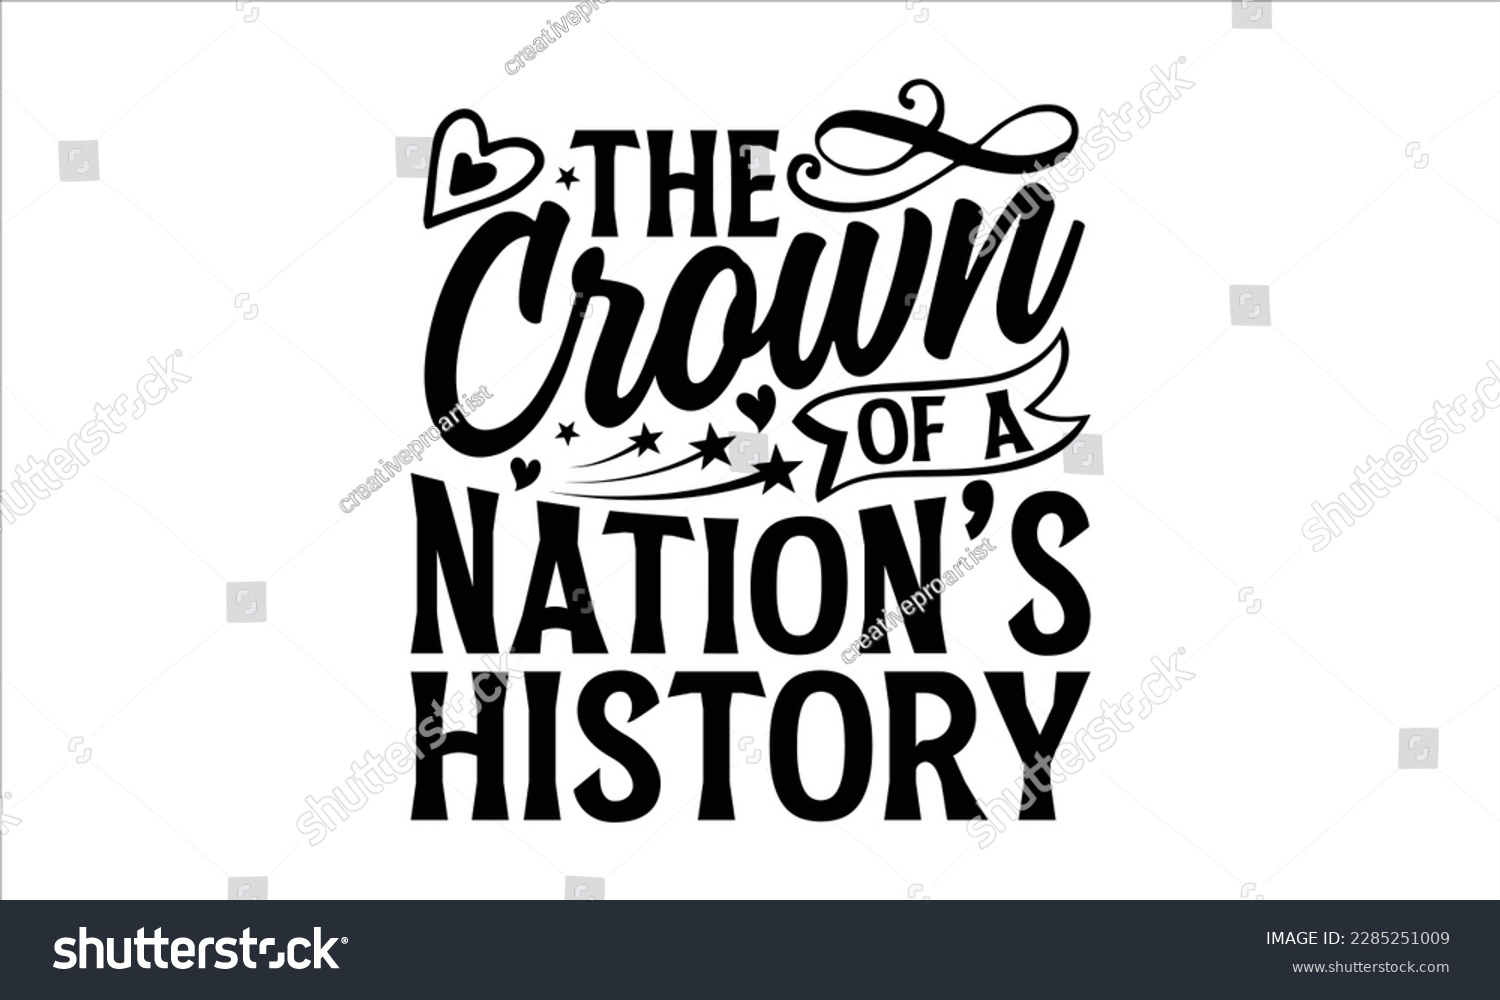 SVG of The Crown of a Nation’s History- Victoria Day t- shirt Design, Hand lettering illustration for your design, Modern calligraphy, greeting card template with typography text svg for posters, EPS 10 svg